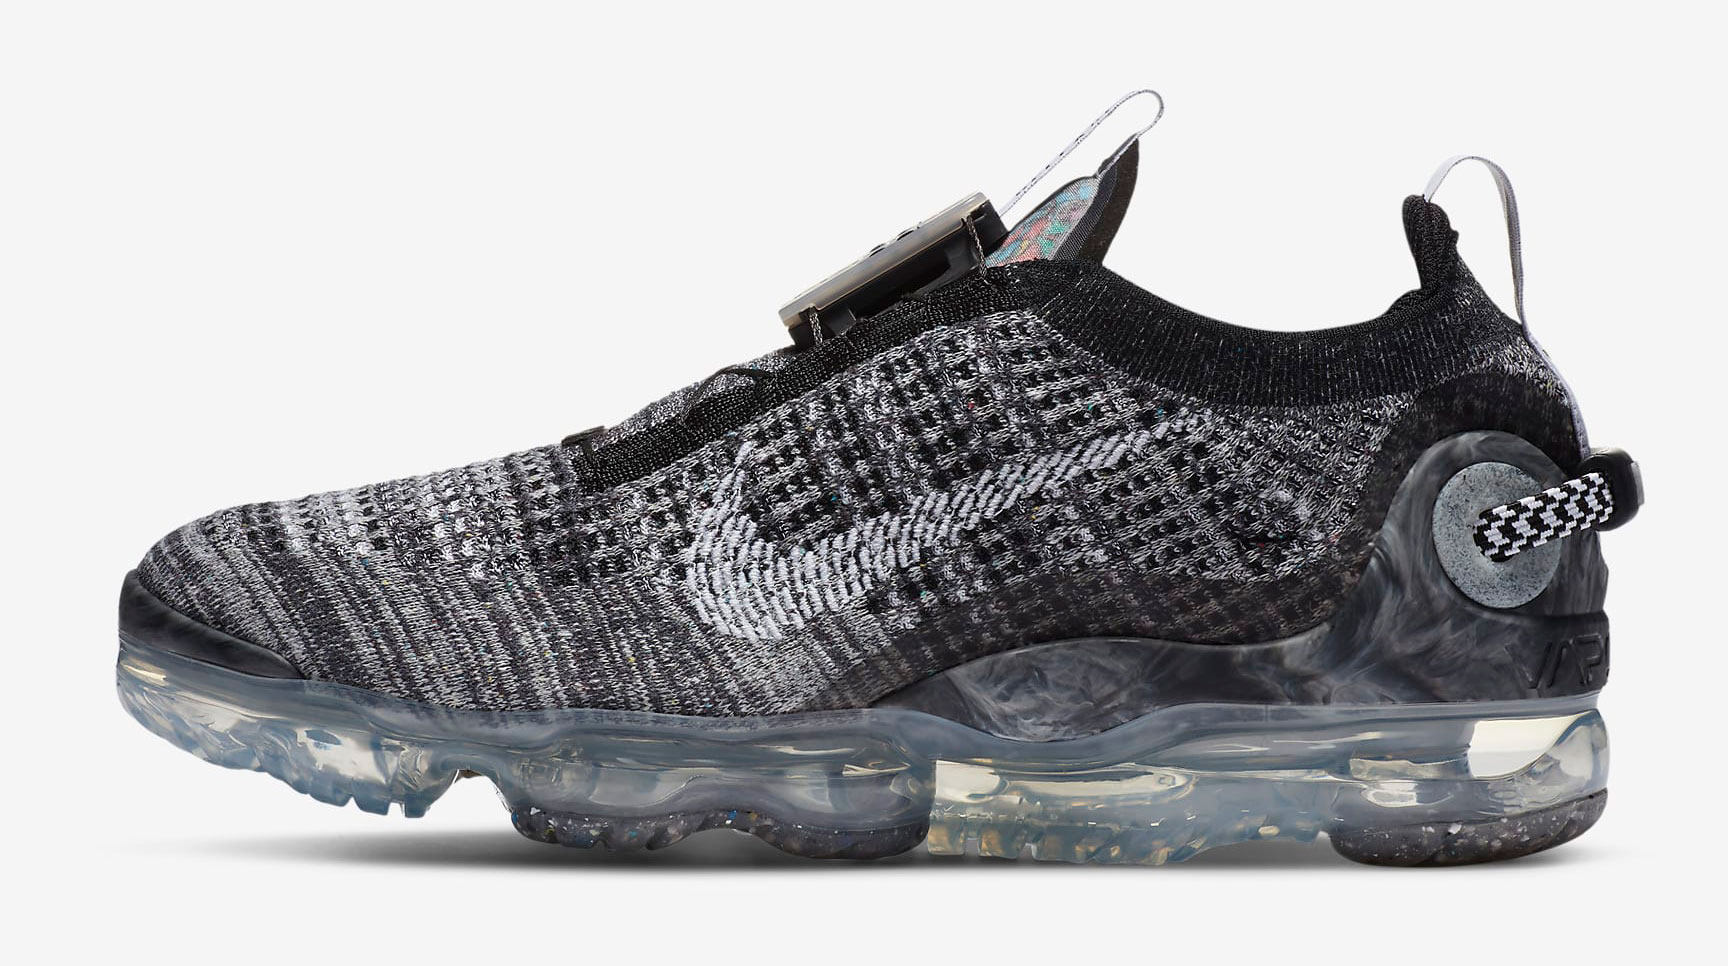 nike dress air vapormax flyknit 2020 oreo release date price 2